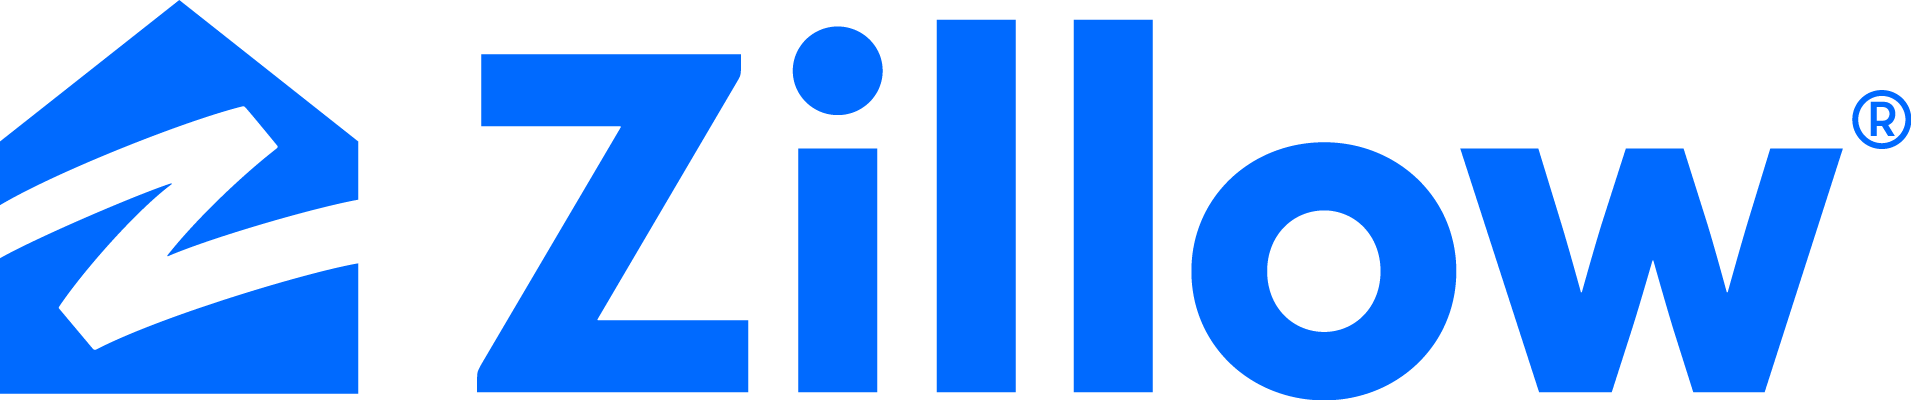 Zillow_Blue_RGB logo.png